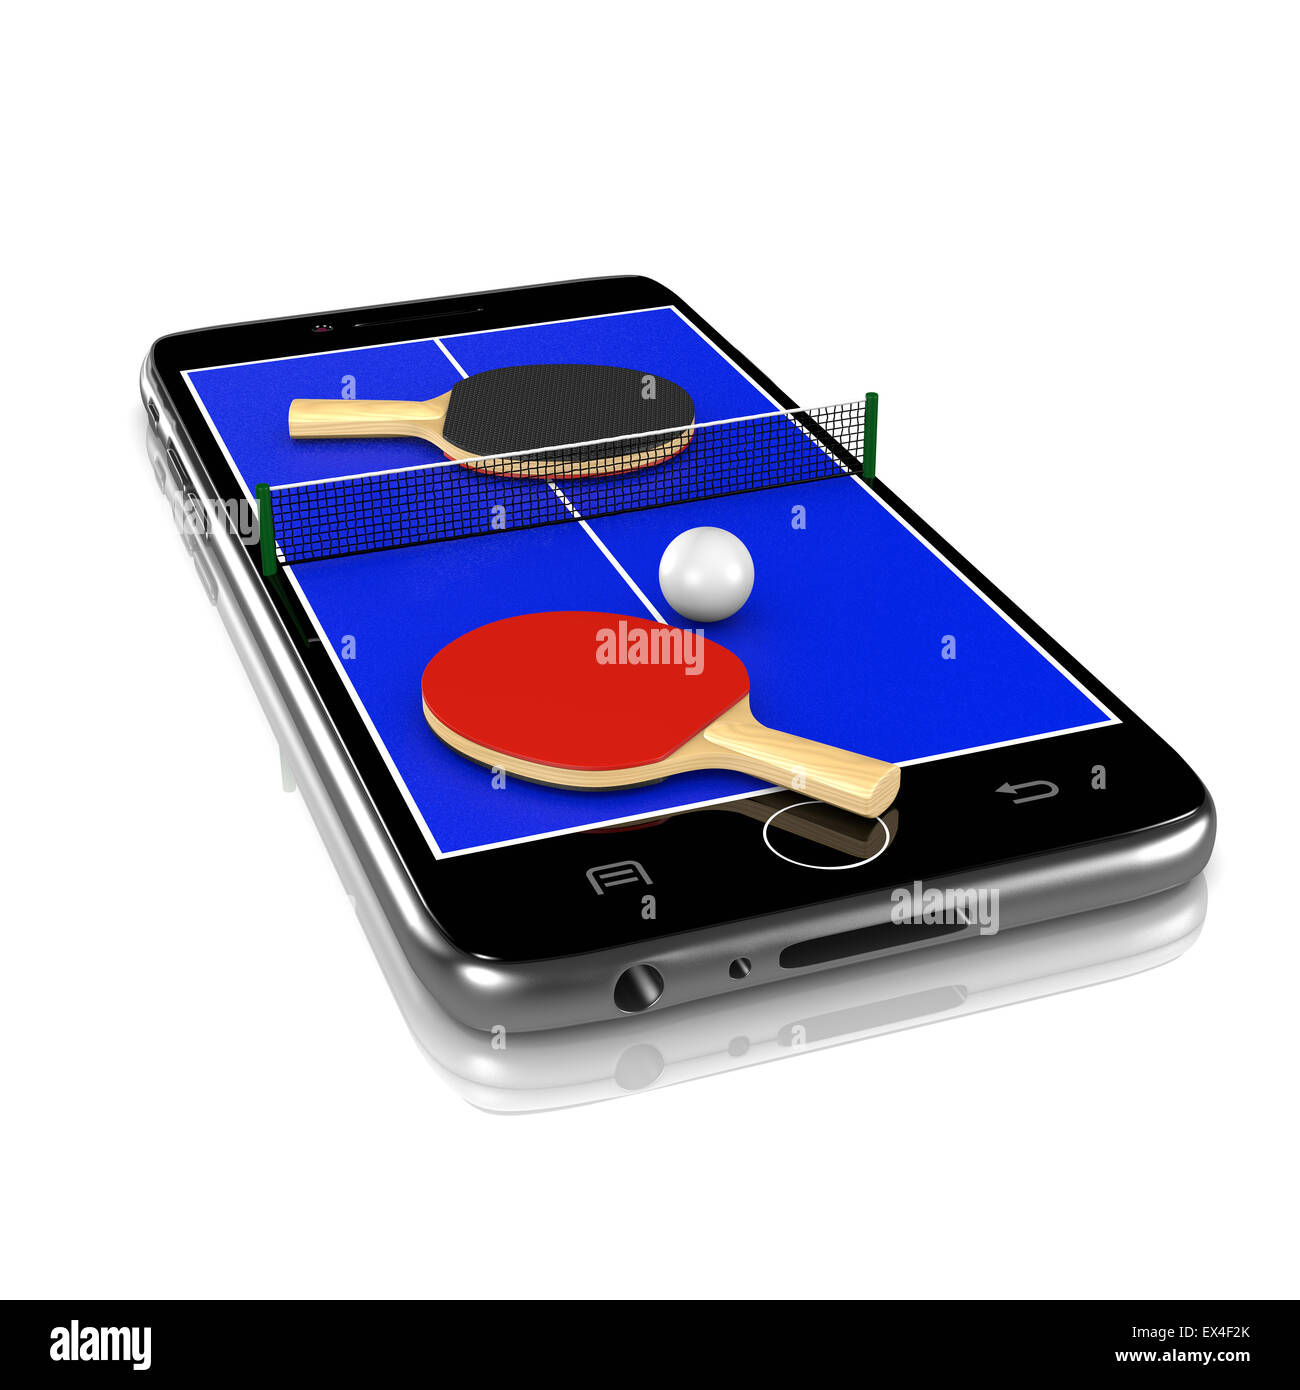 Ping-Pong Table Tennis Field with Ball, Net and Rackets Equipment on Smartphone Display 3D Illustration Isolated on White Backgr Stock Photo